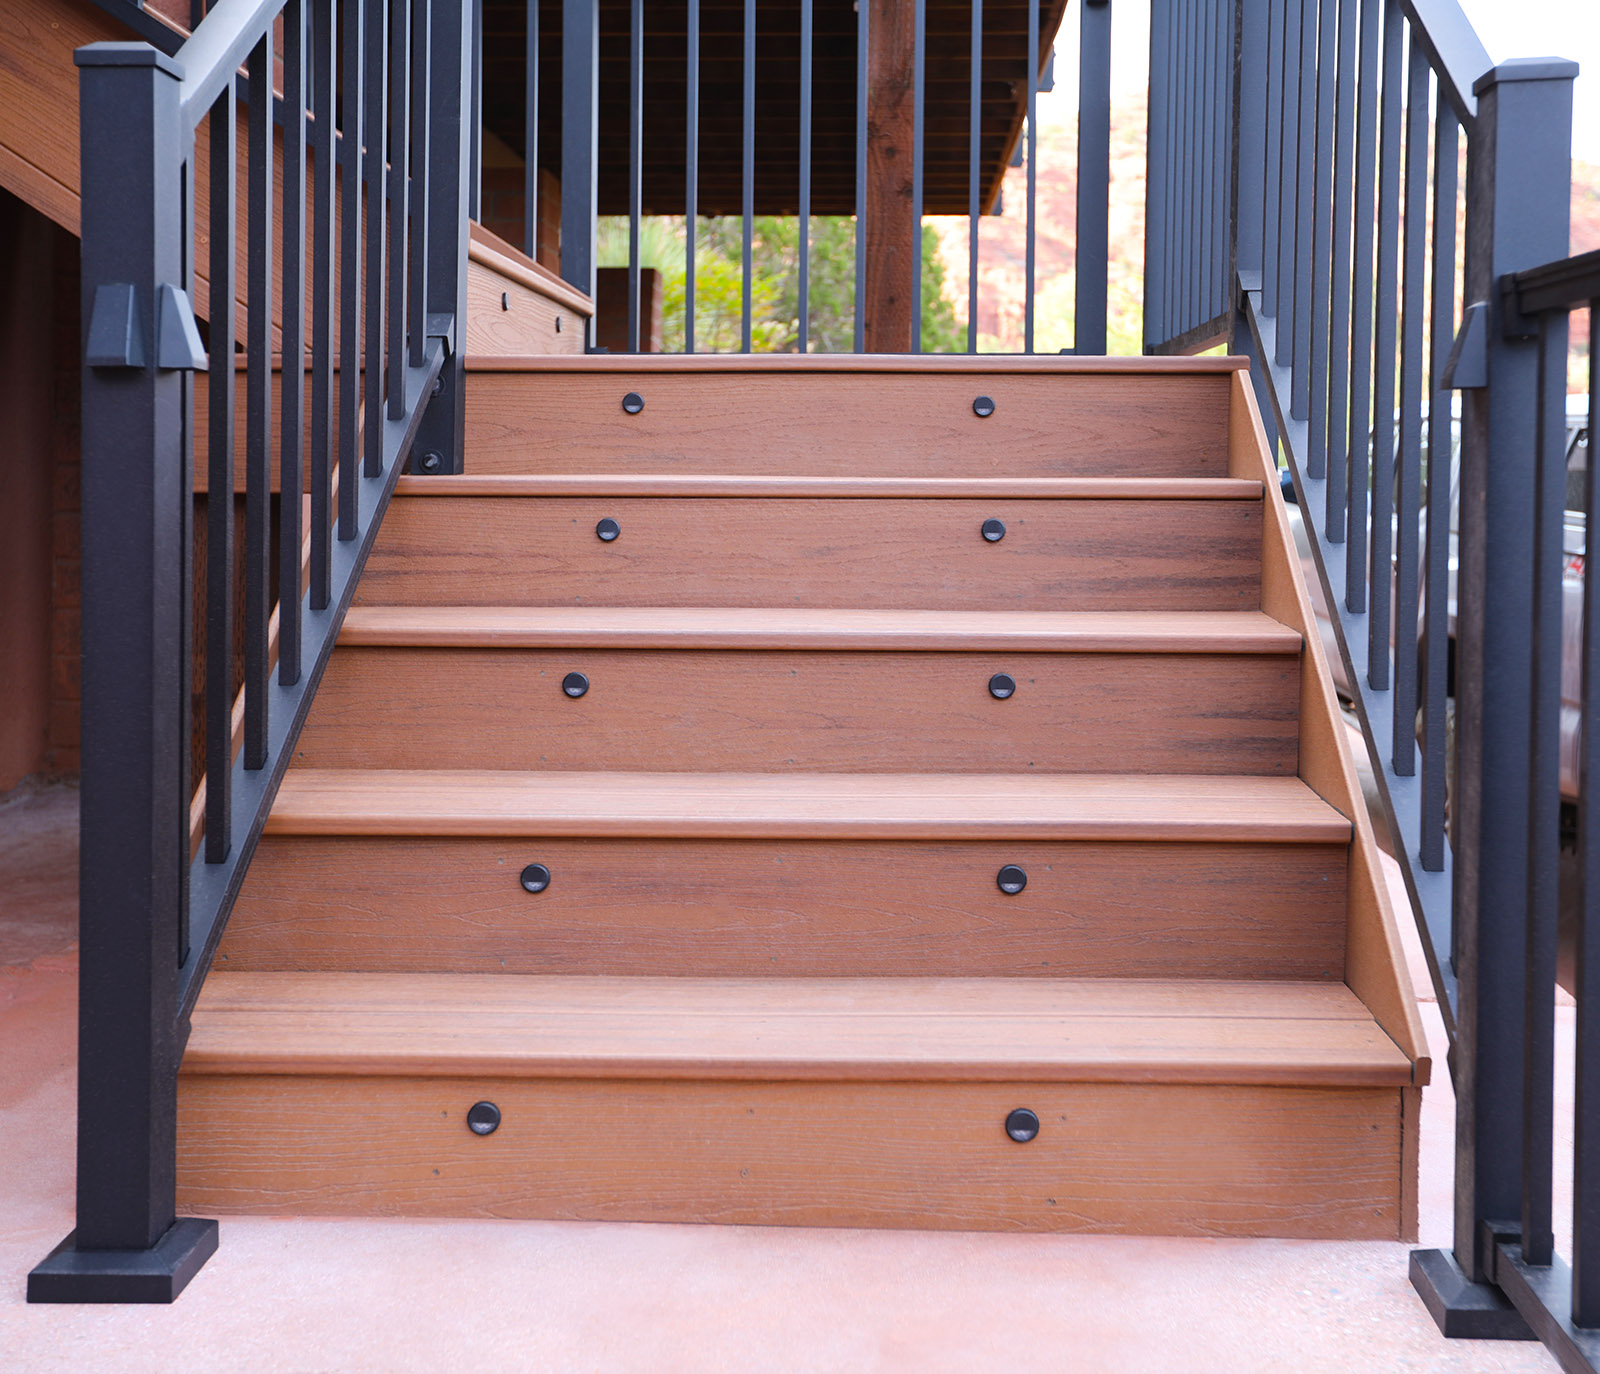 Trex stair riser lights.  Small lights built into the risers of a stairway on a Trex deck in Sedona.